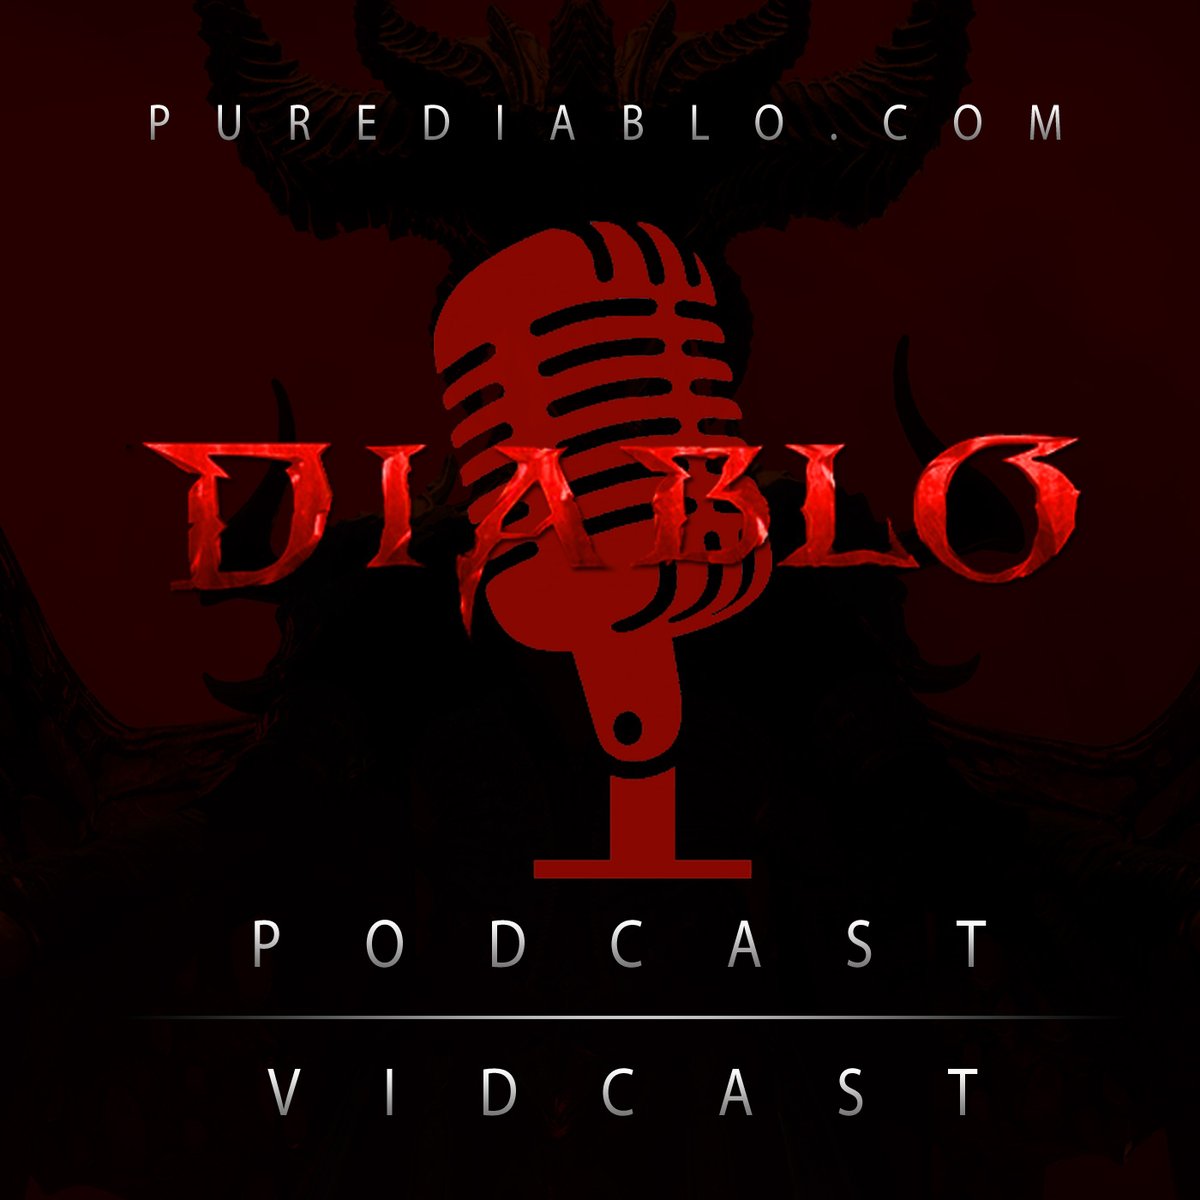 We delayed the next Diablo Podcast slightly to today due to the dev stream last night. It's coming today, we promise. Keep an eye out for it!

#diablo4 #diabloIV #purediablo